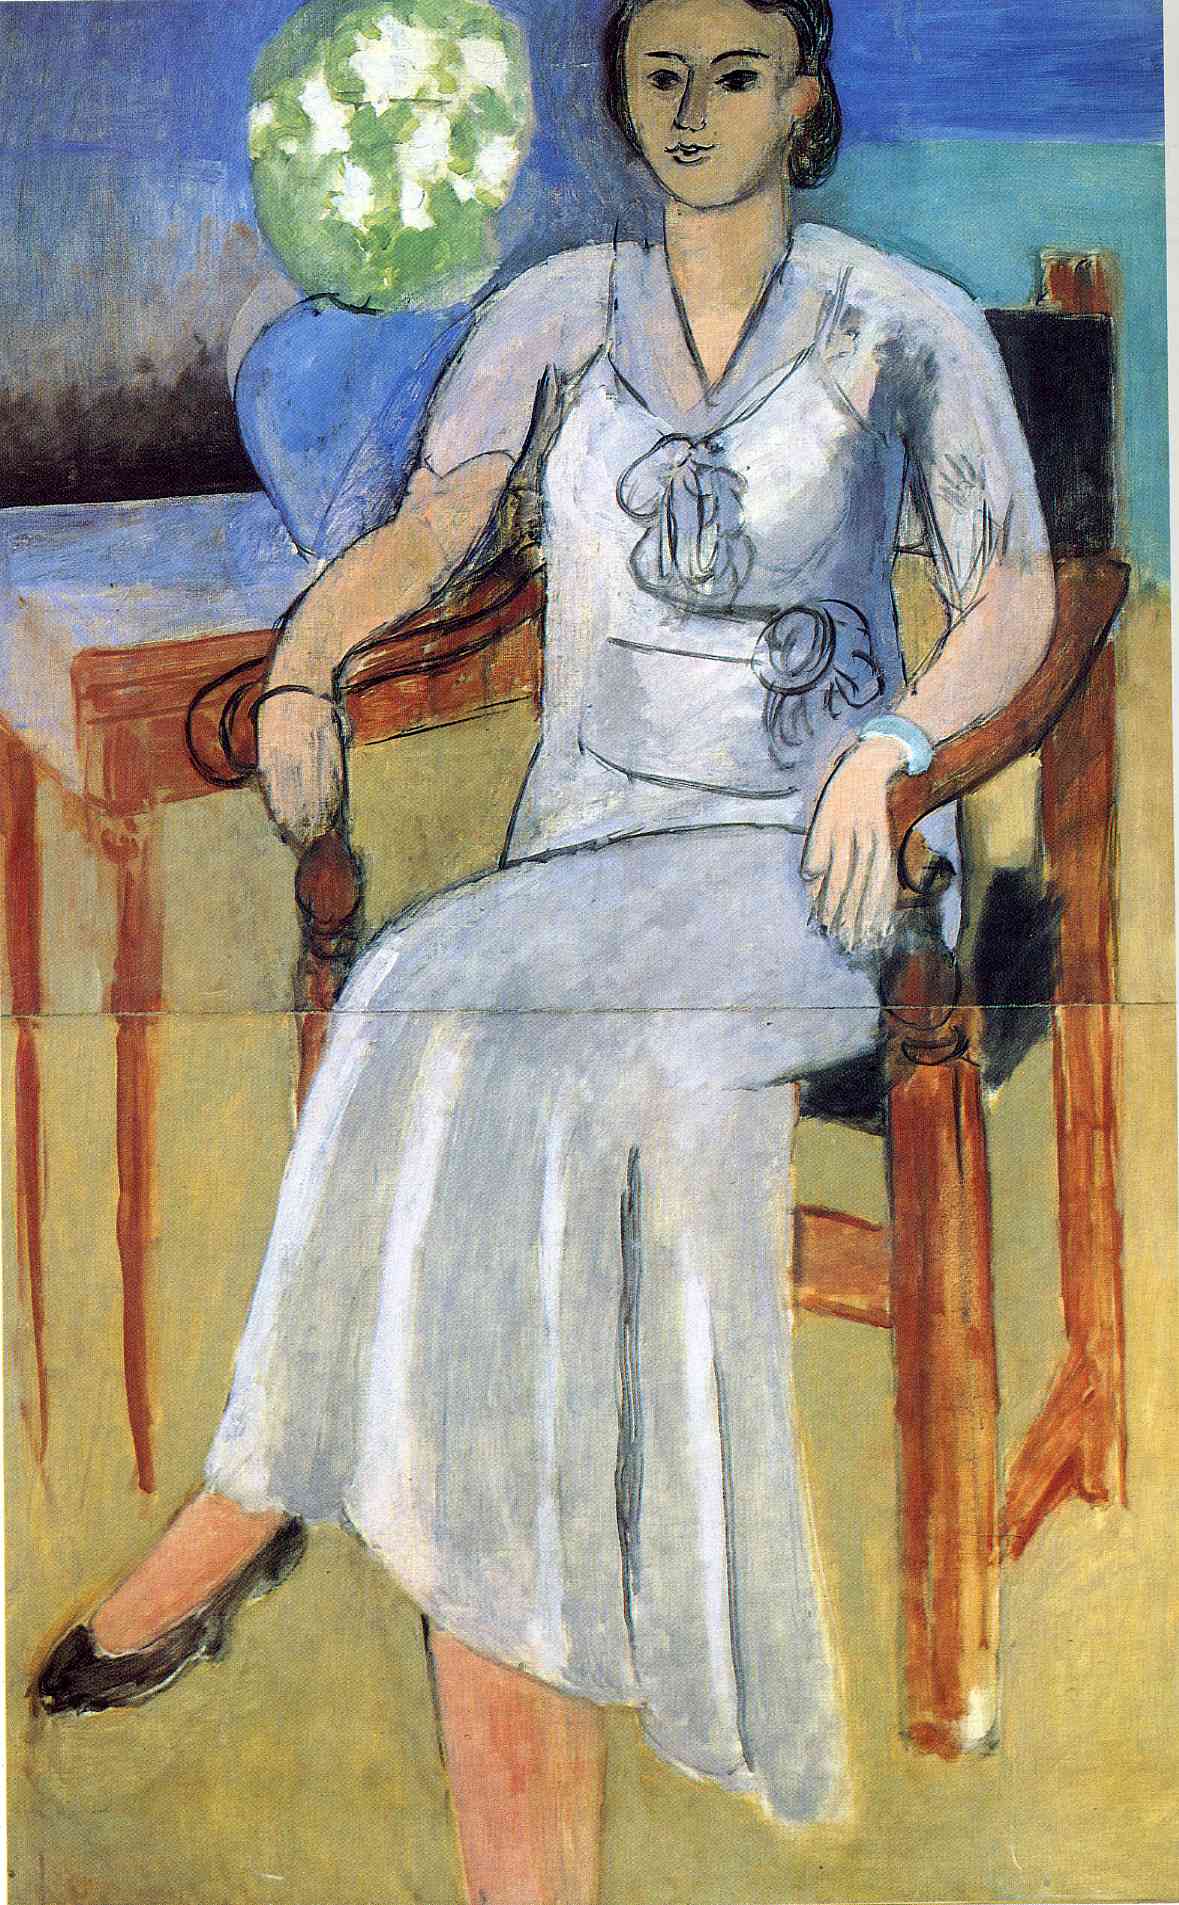 Woman with a White Dress (1934).